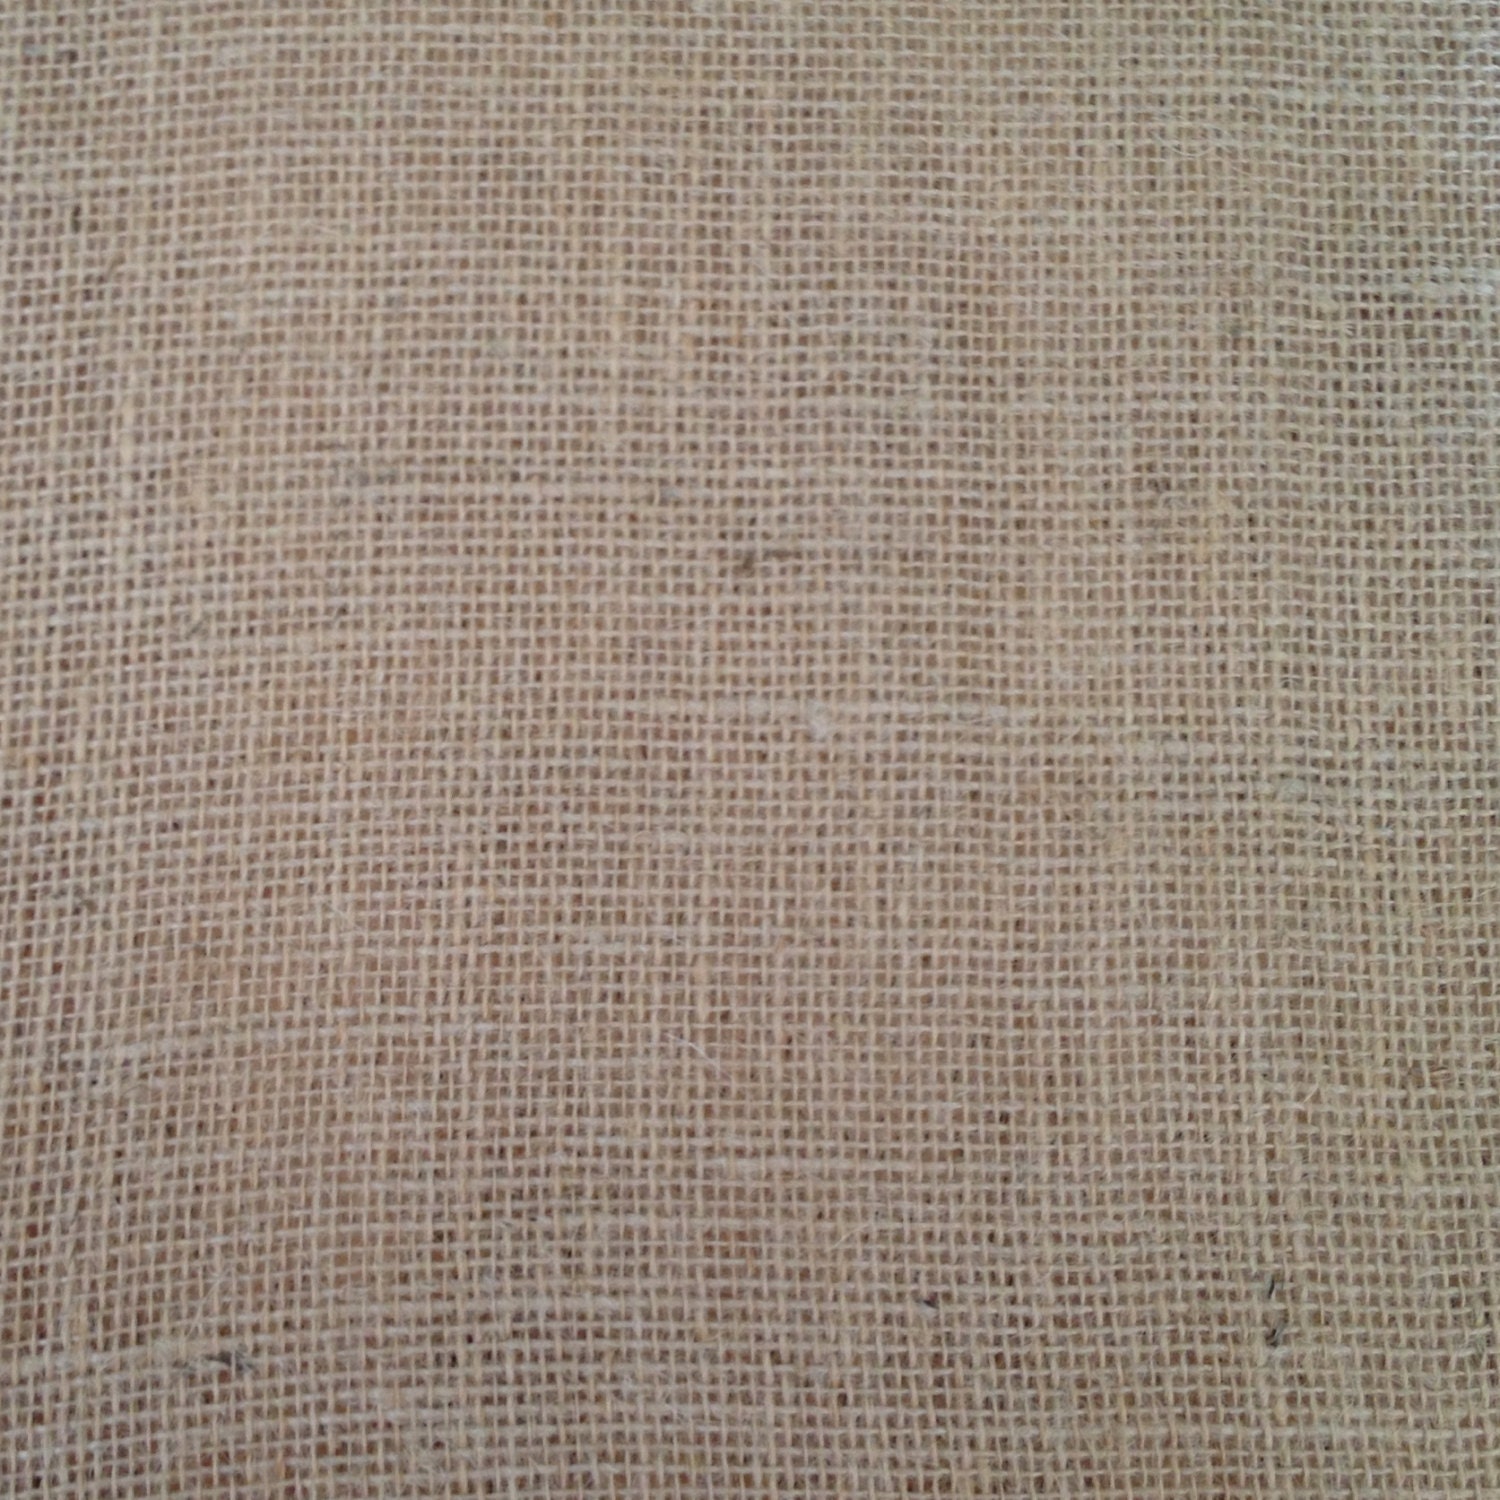 Square Burlap Placemat/Overlay - 22" long x 22" wide